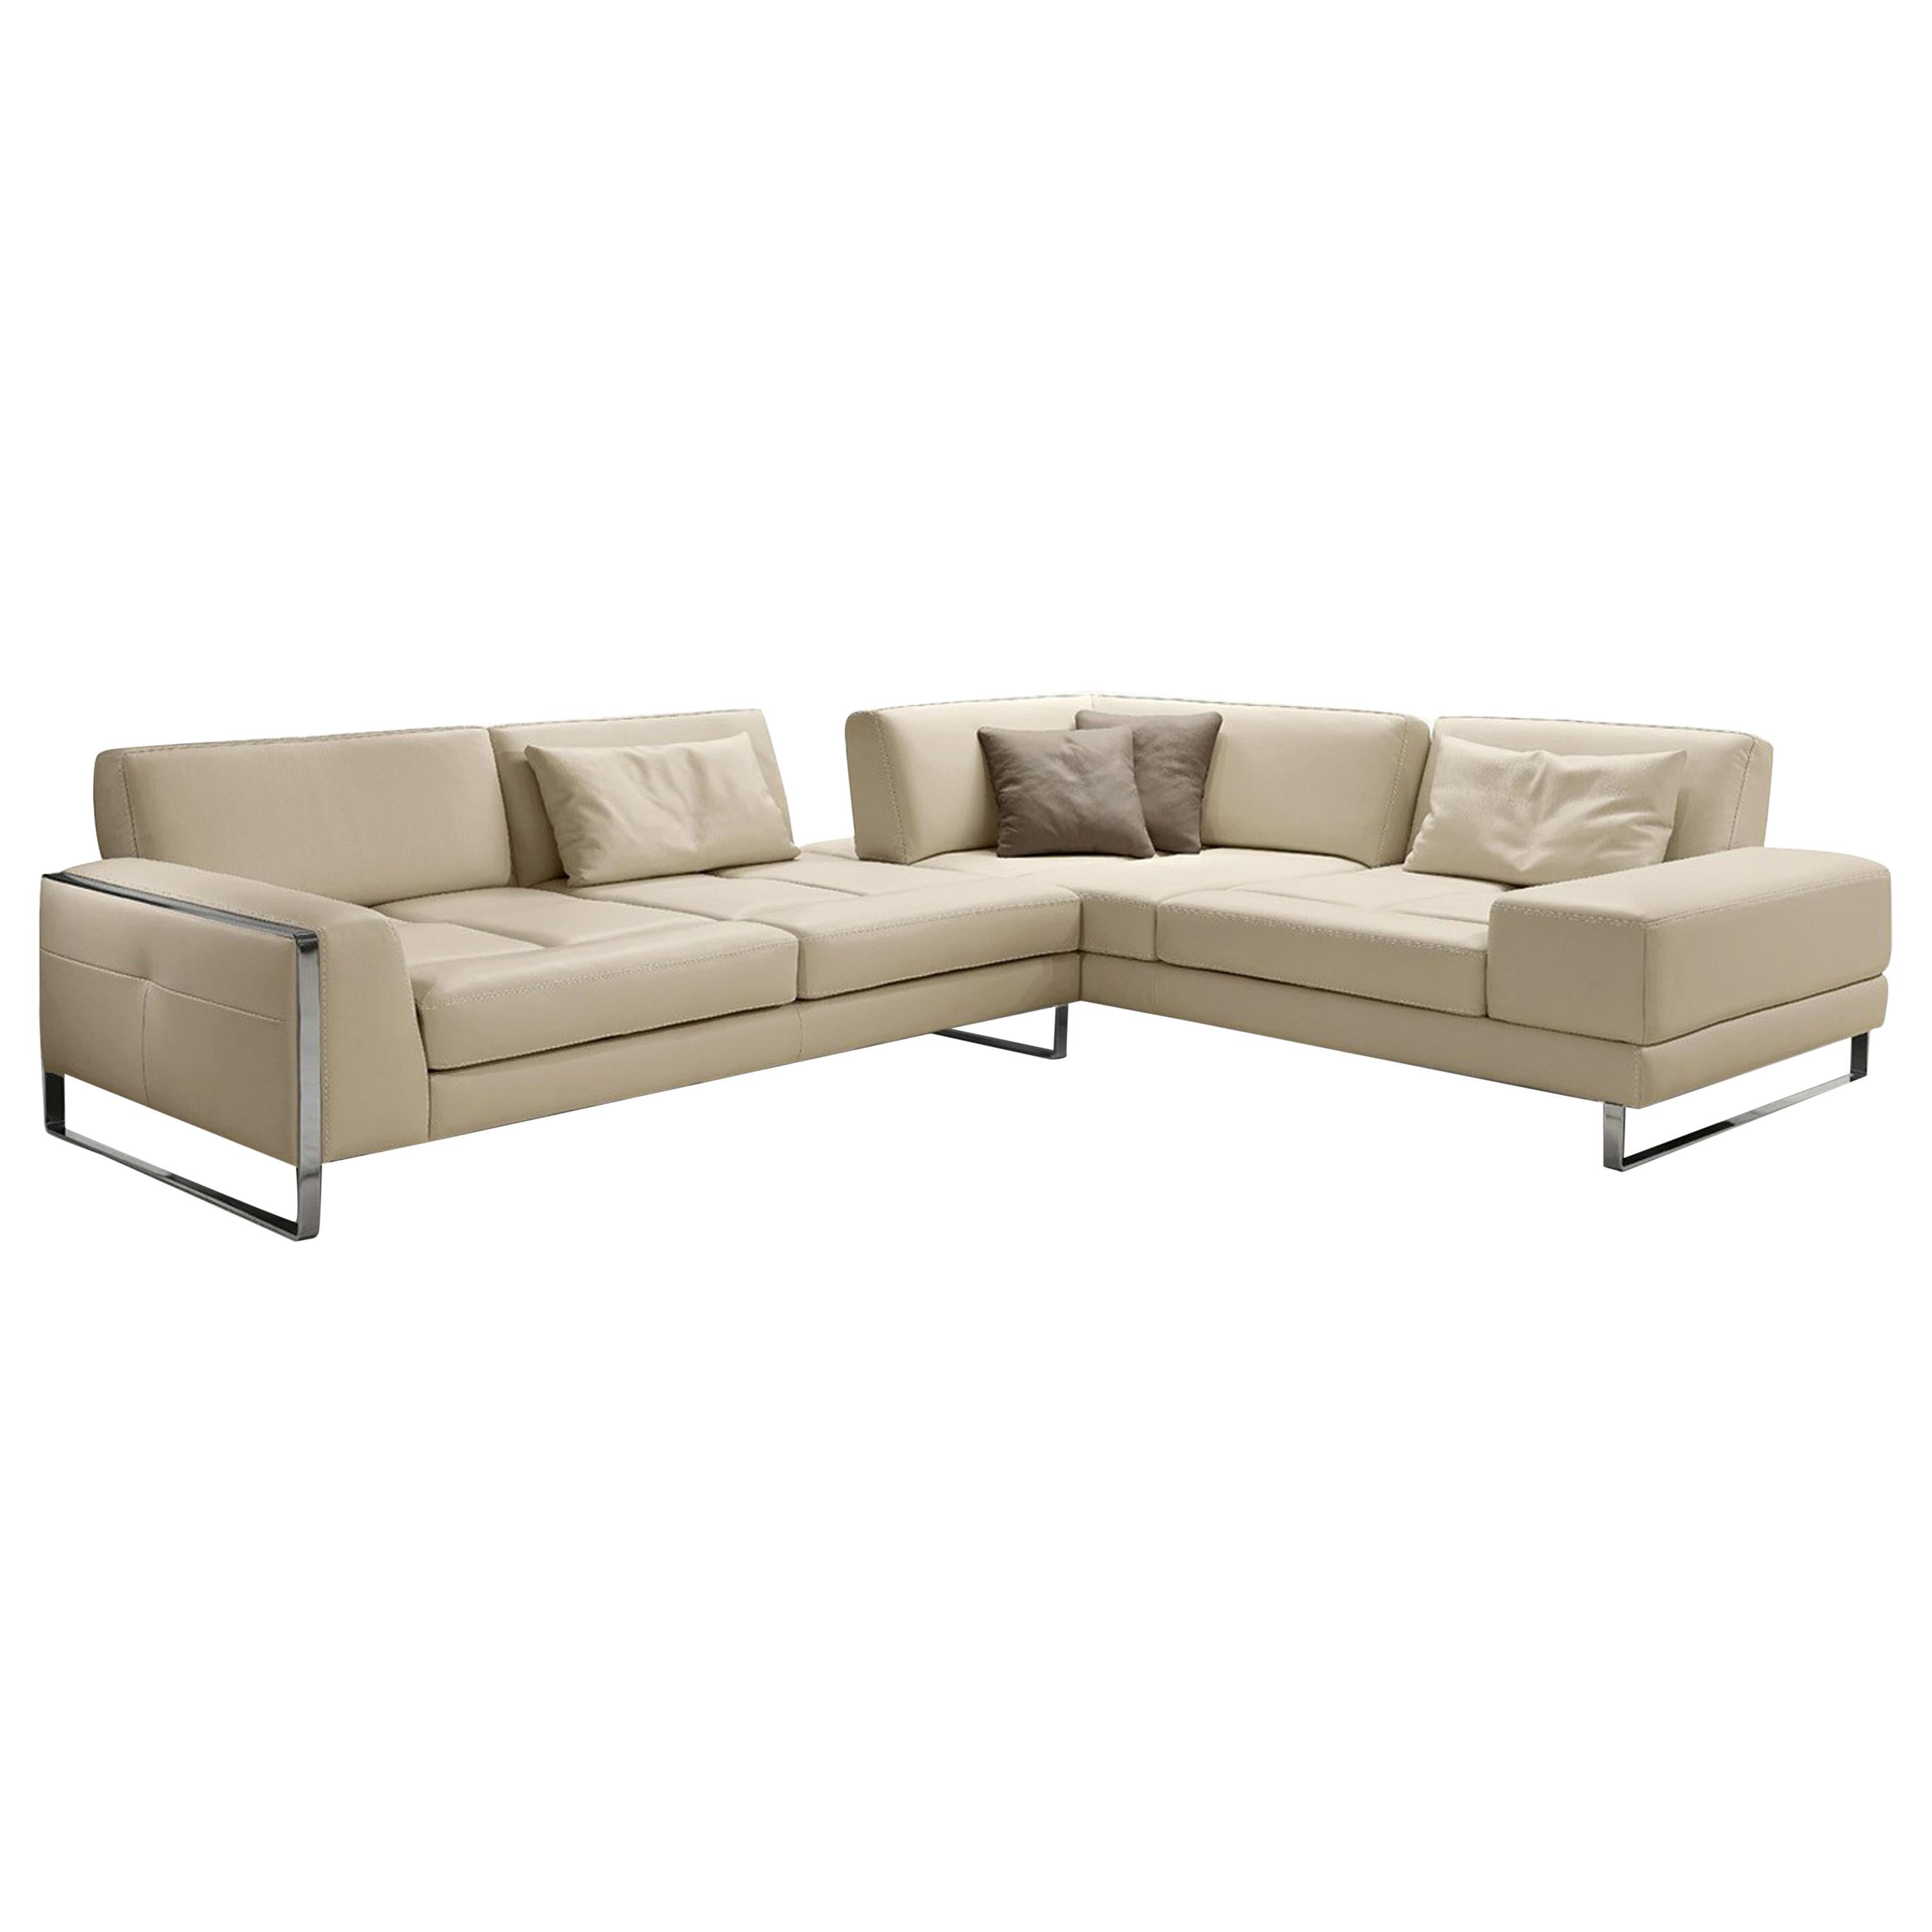 Italian Leather Sectional with Adjustable Back Cushions For Sale